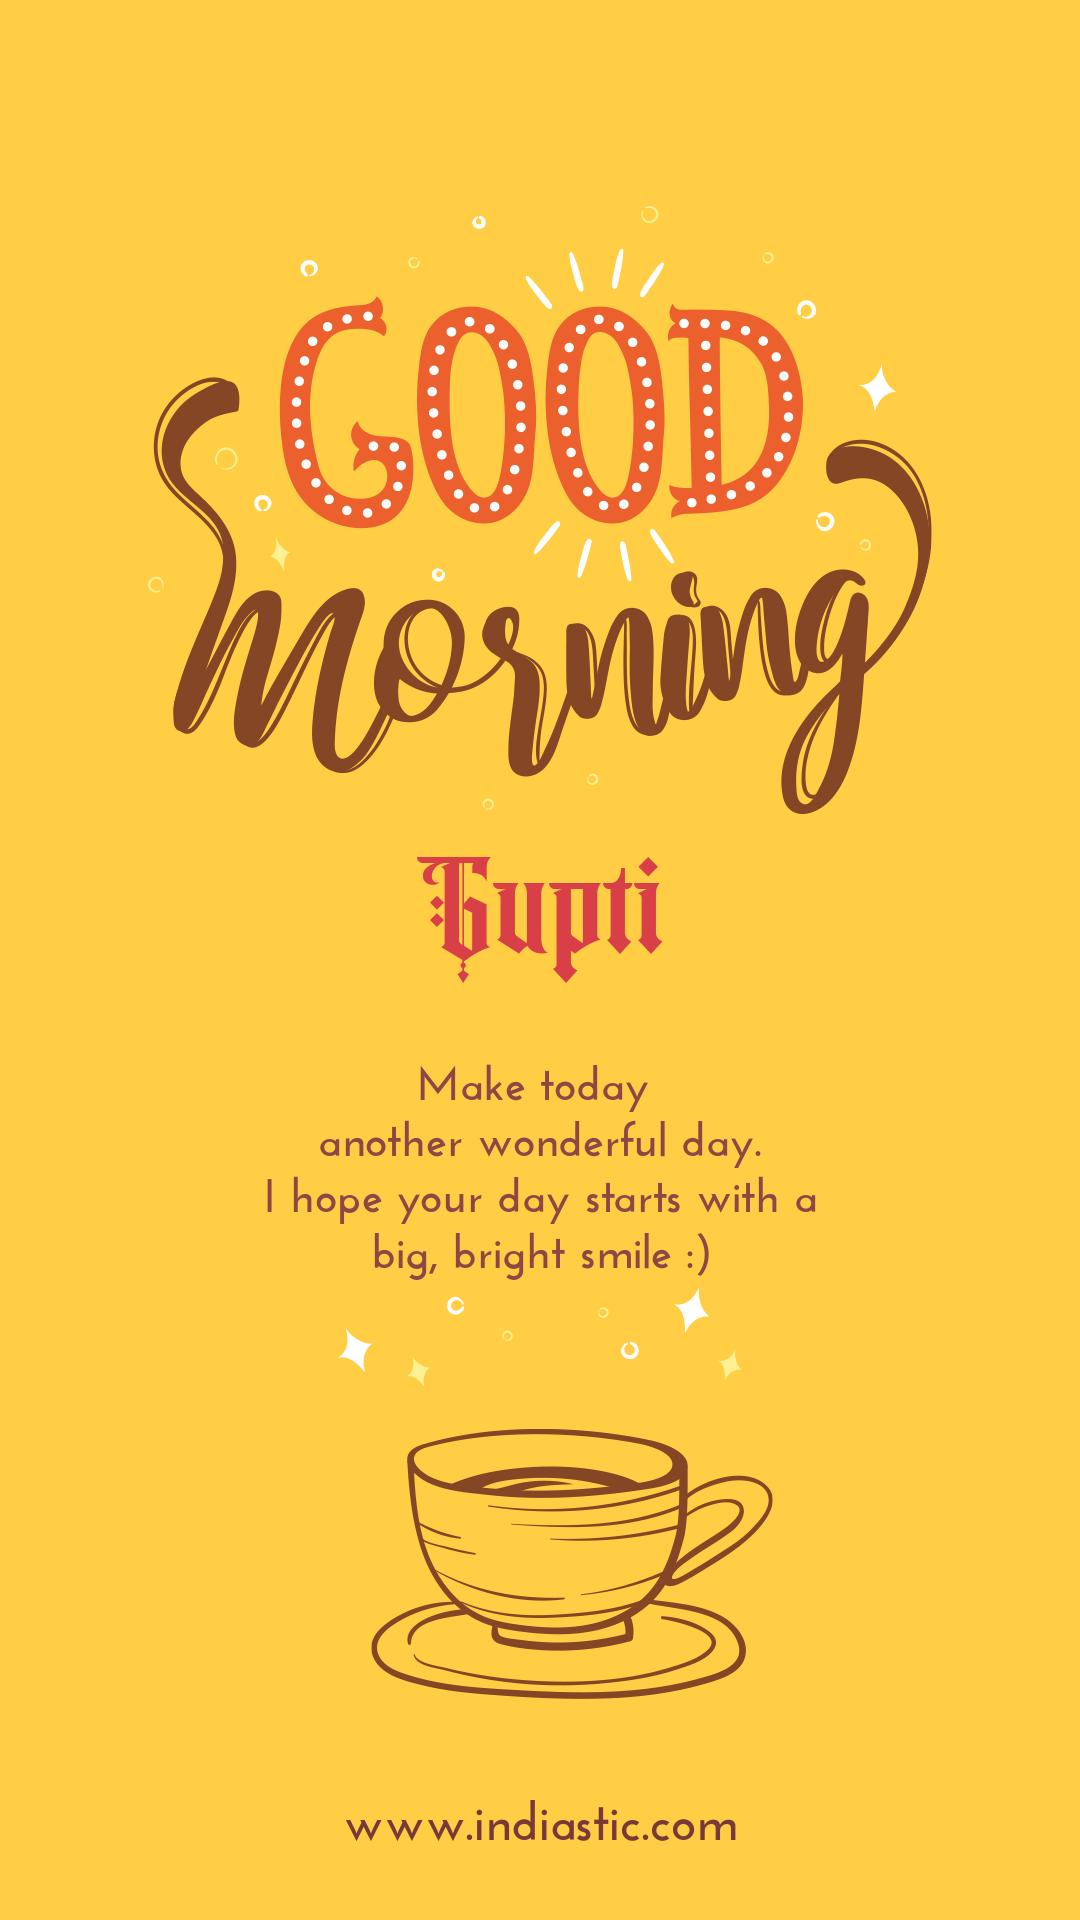 Good Morning Gupti wished Images, Time to Start with Good morning wishes  cards.